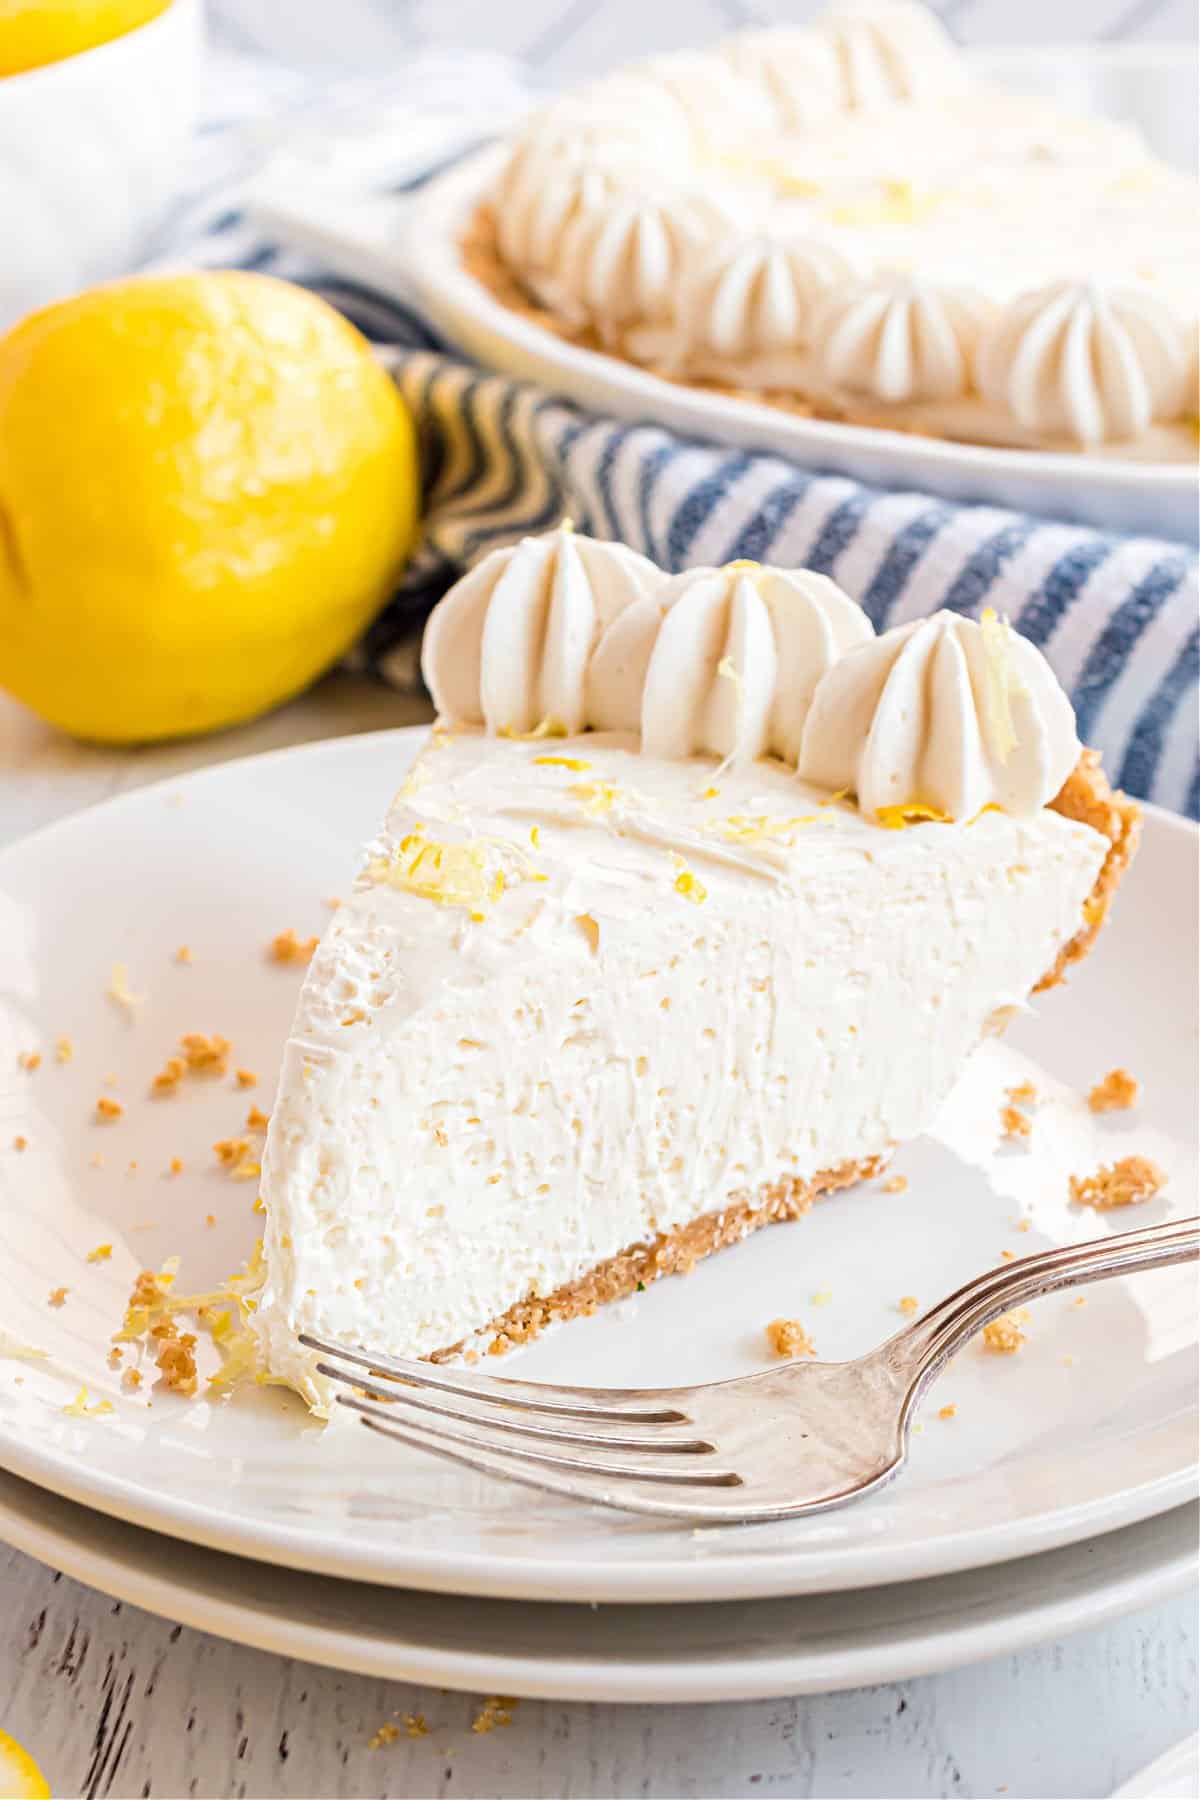 Slice of lemon cheesecake on a white plate.